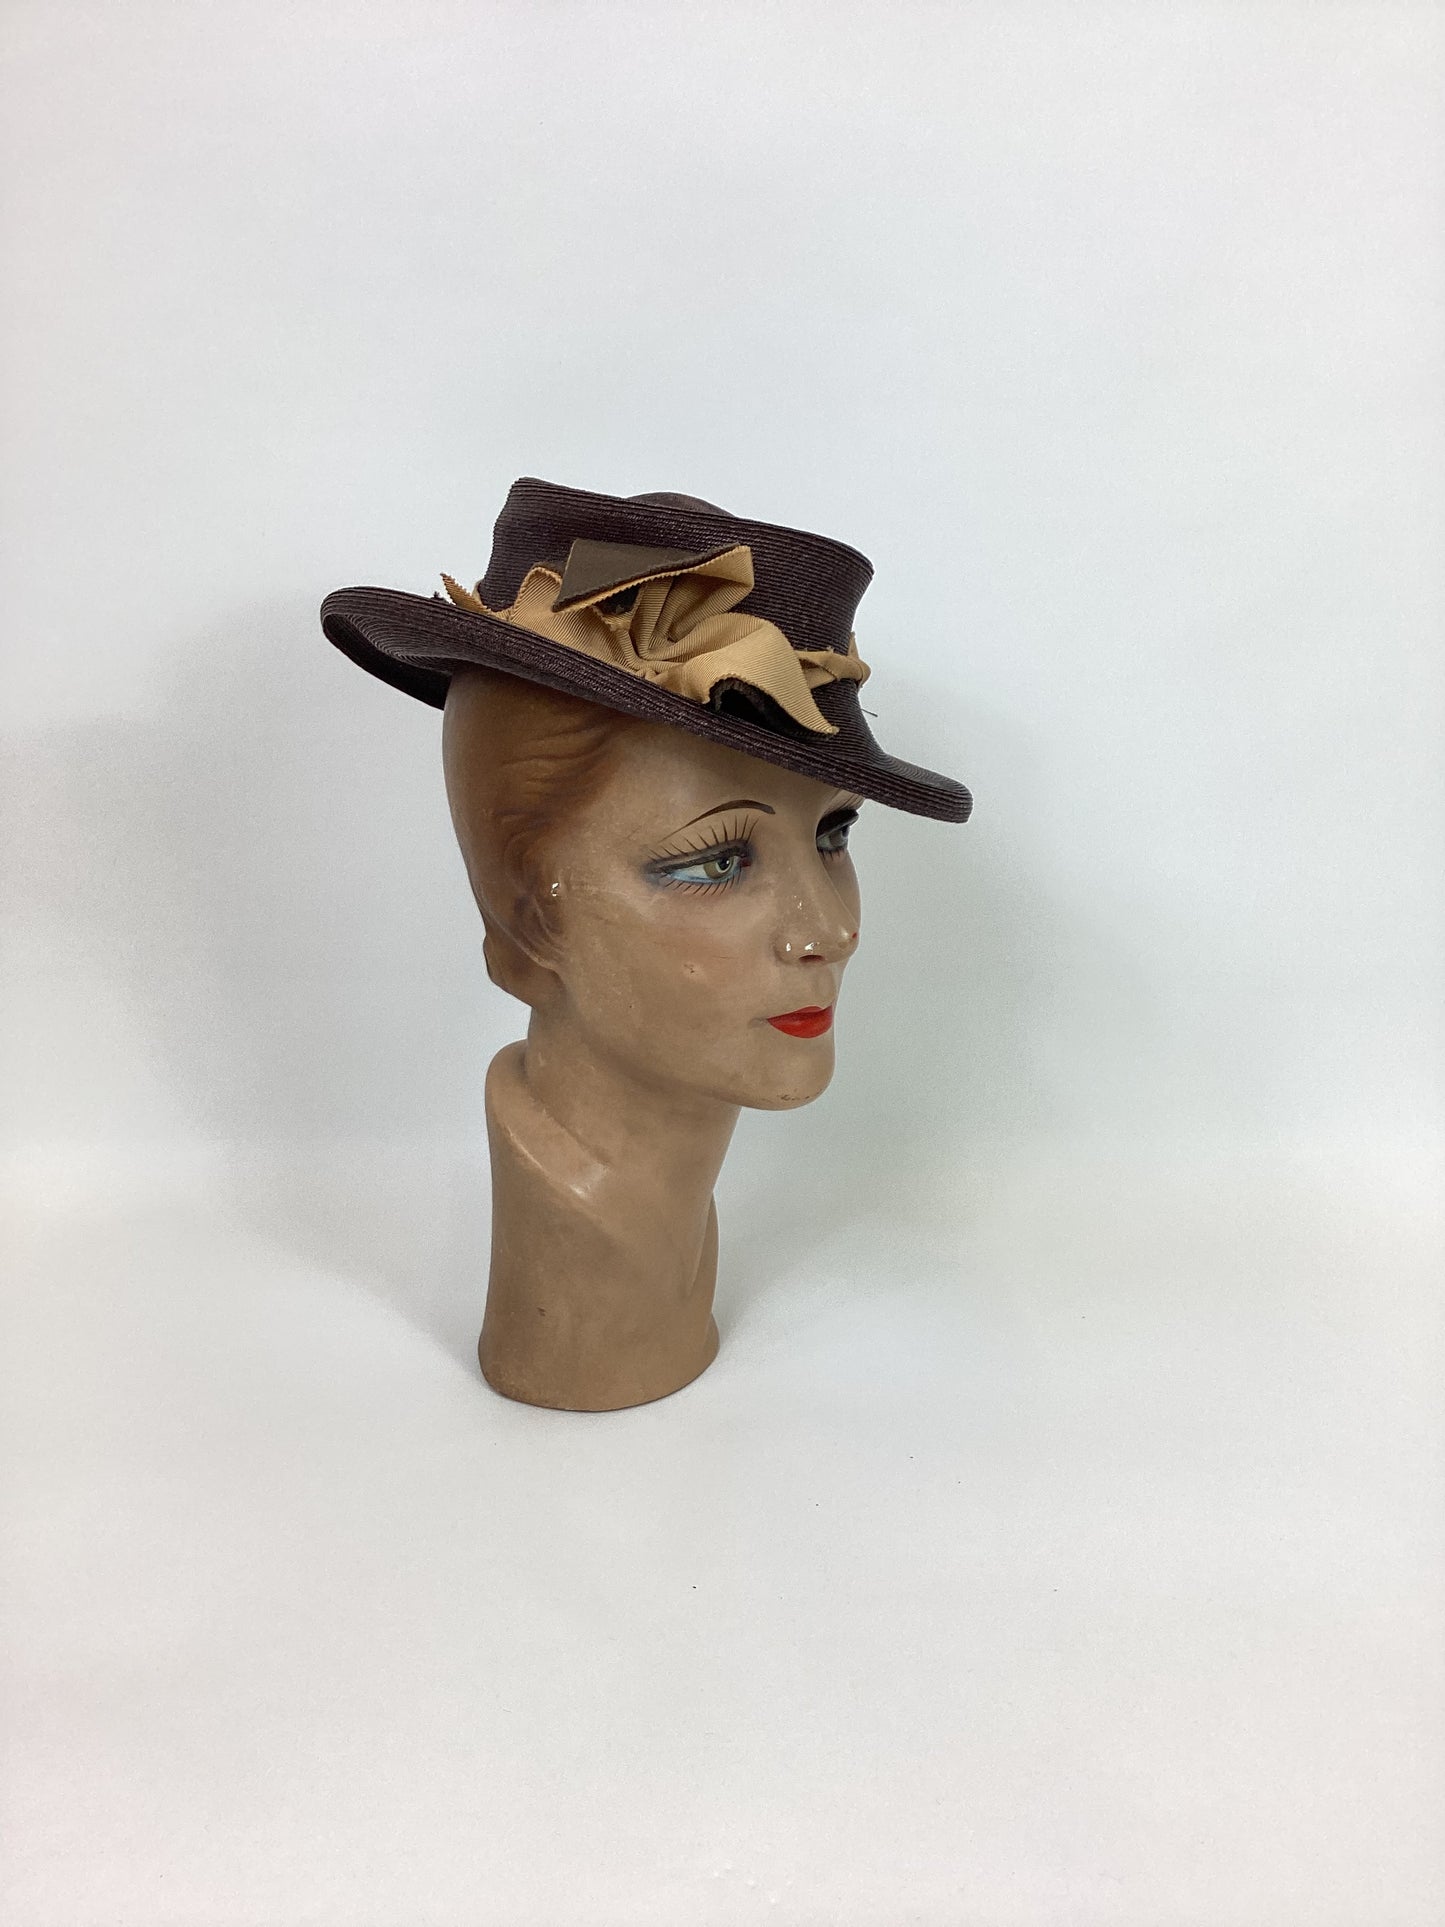 Original 1940’s Stunning Straw Topper Hat - In Chocolate Brown With Grosgrain Trim